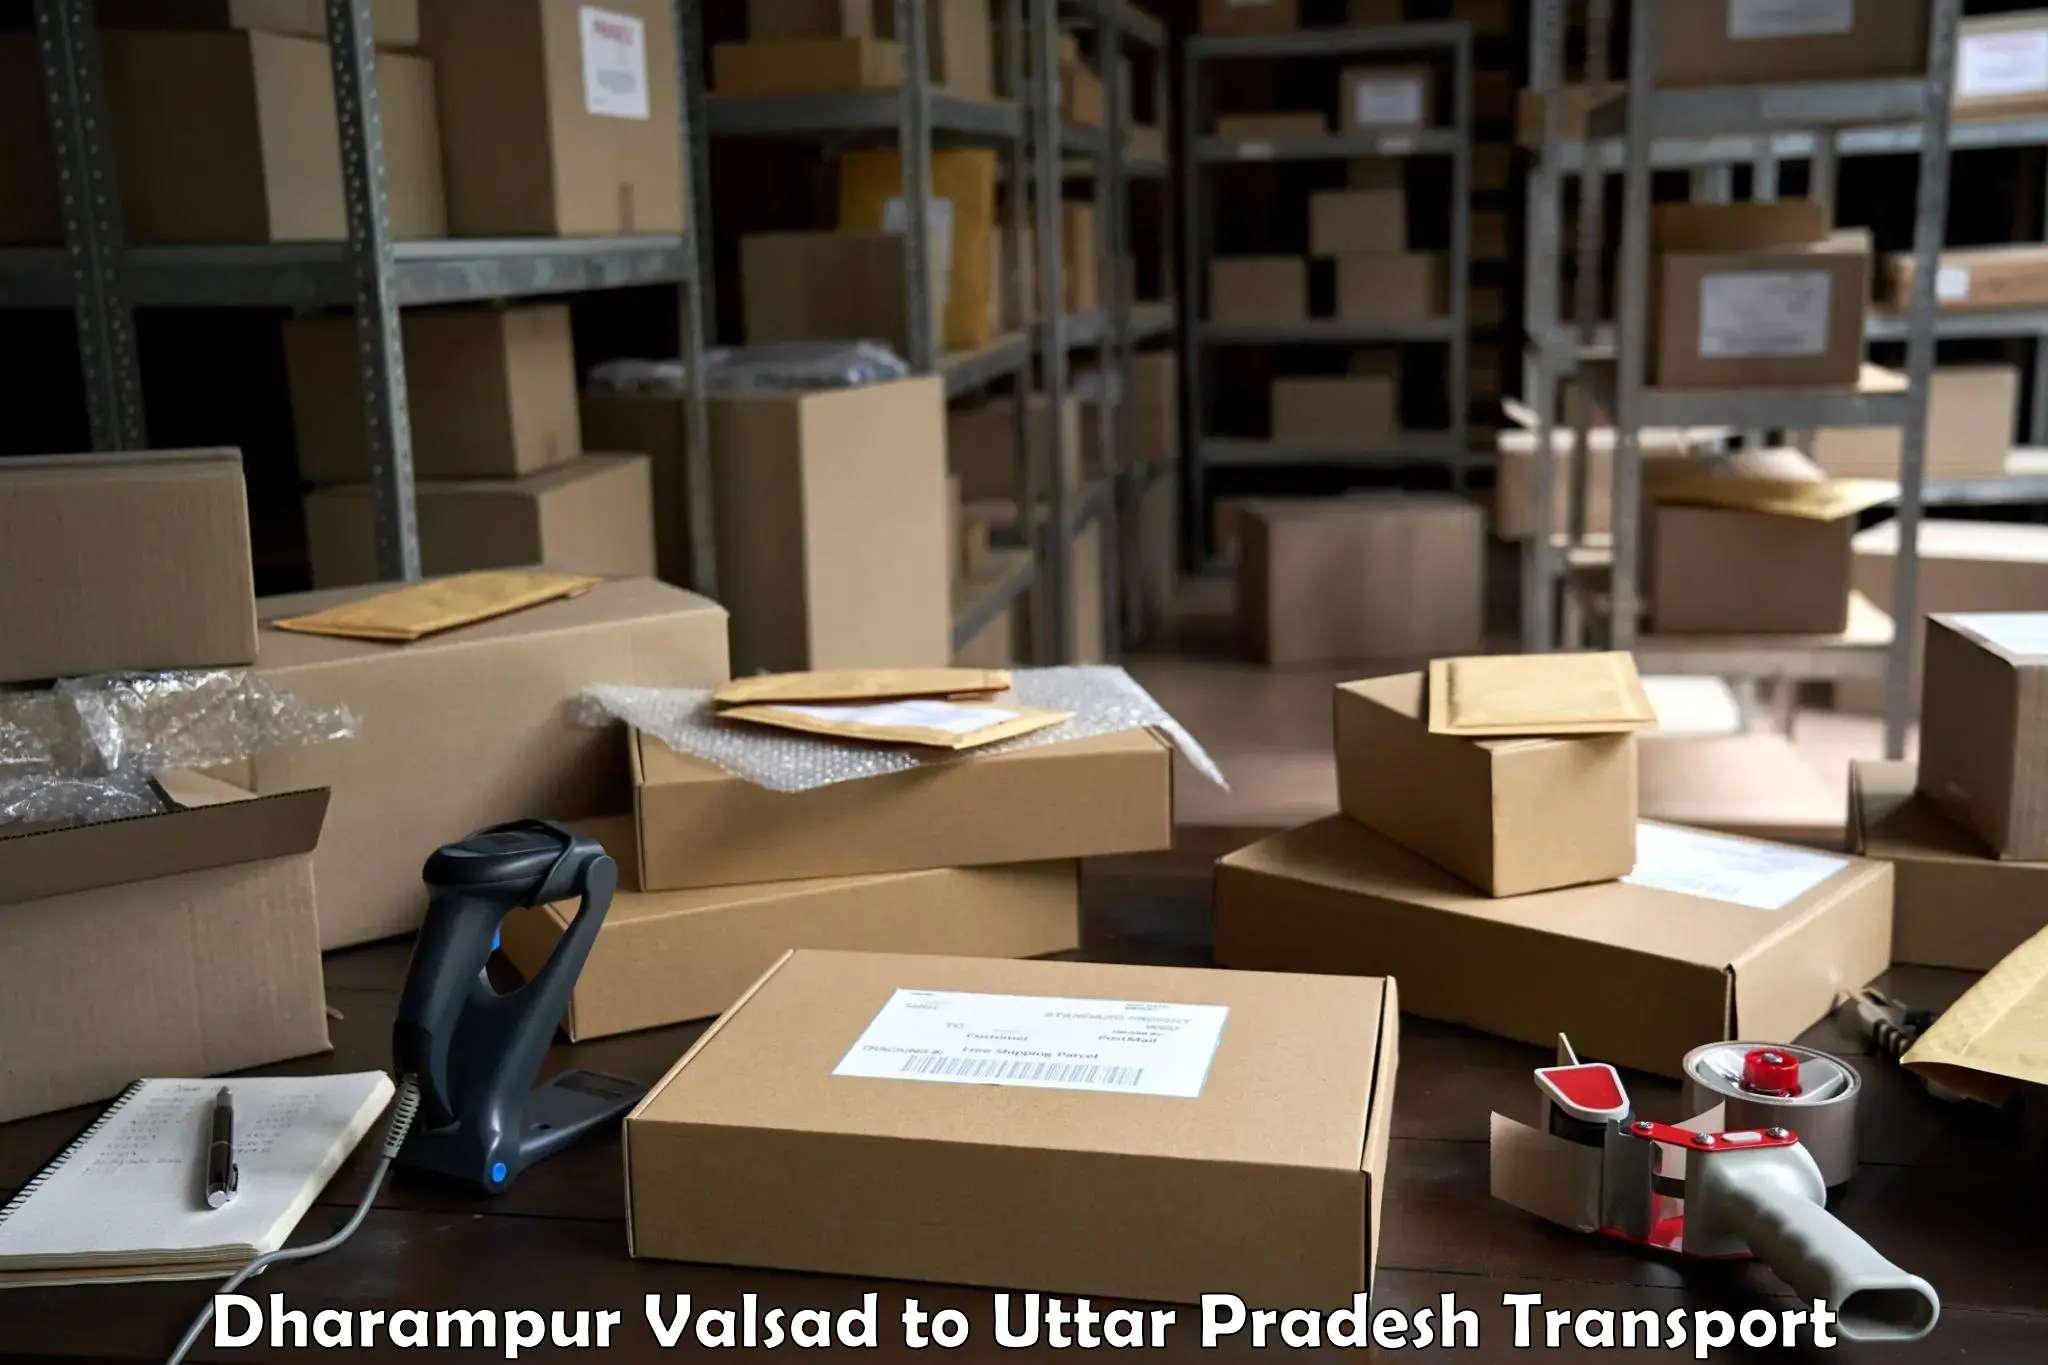 Truck transport companies in India Dharampur Valsad to Maudaha